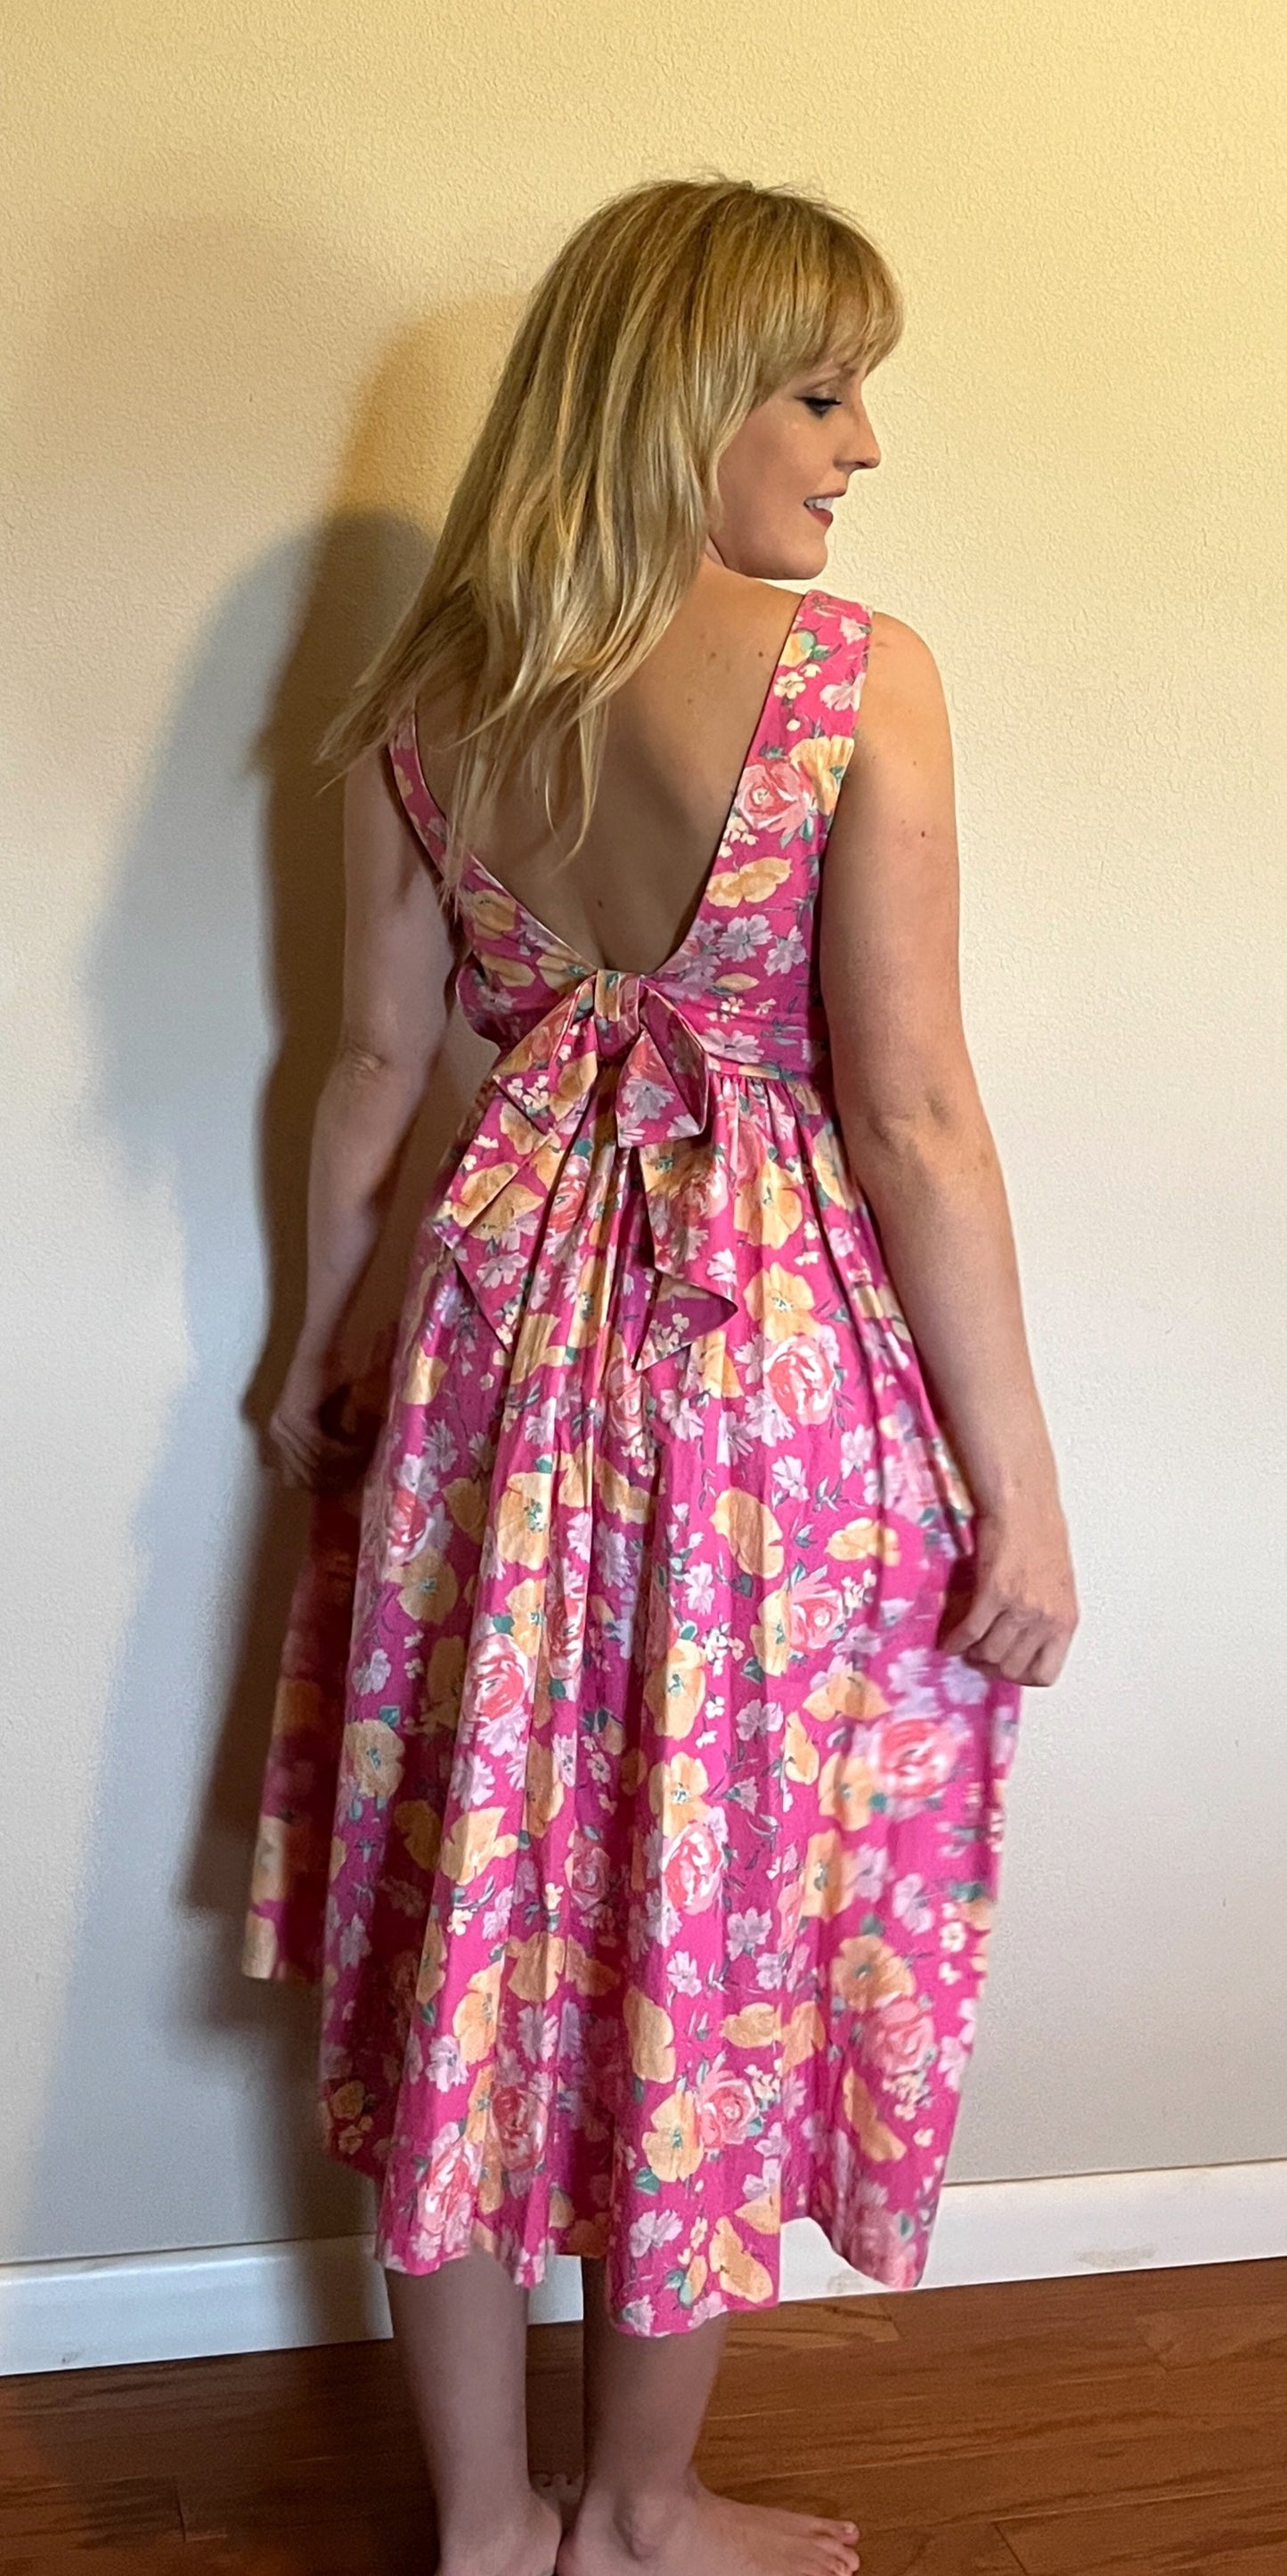 Vintage 1980's "Laura Ashley" Pink & Yellow Floral Dress (Altered)